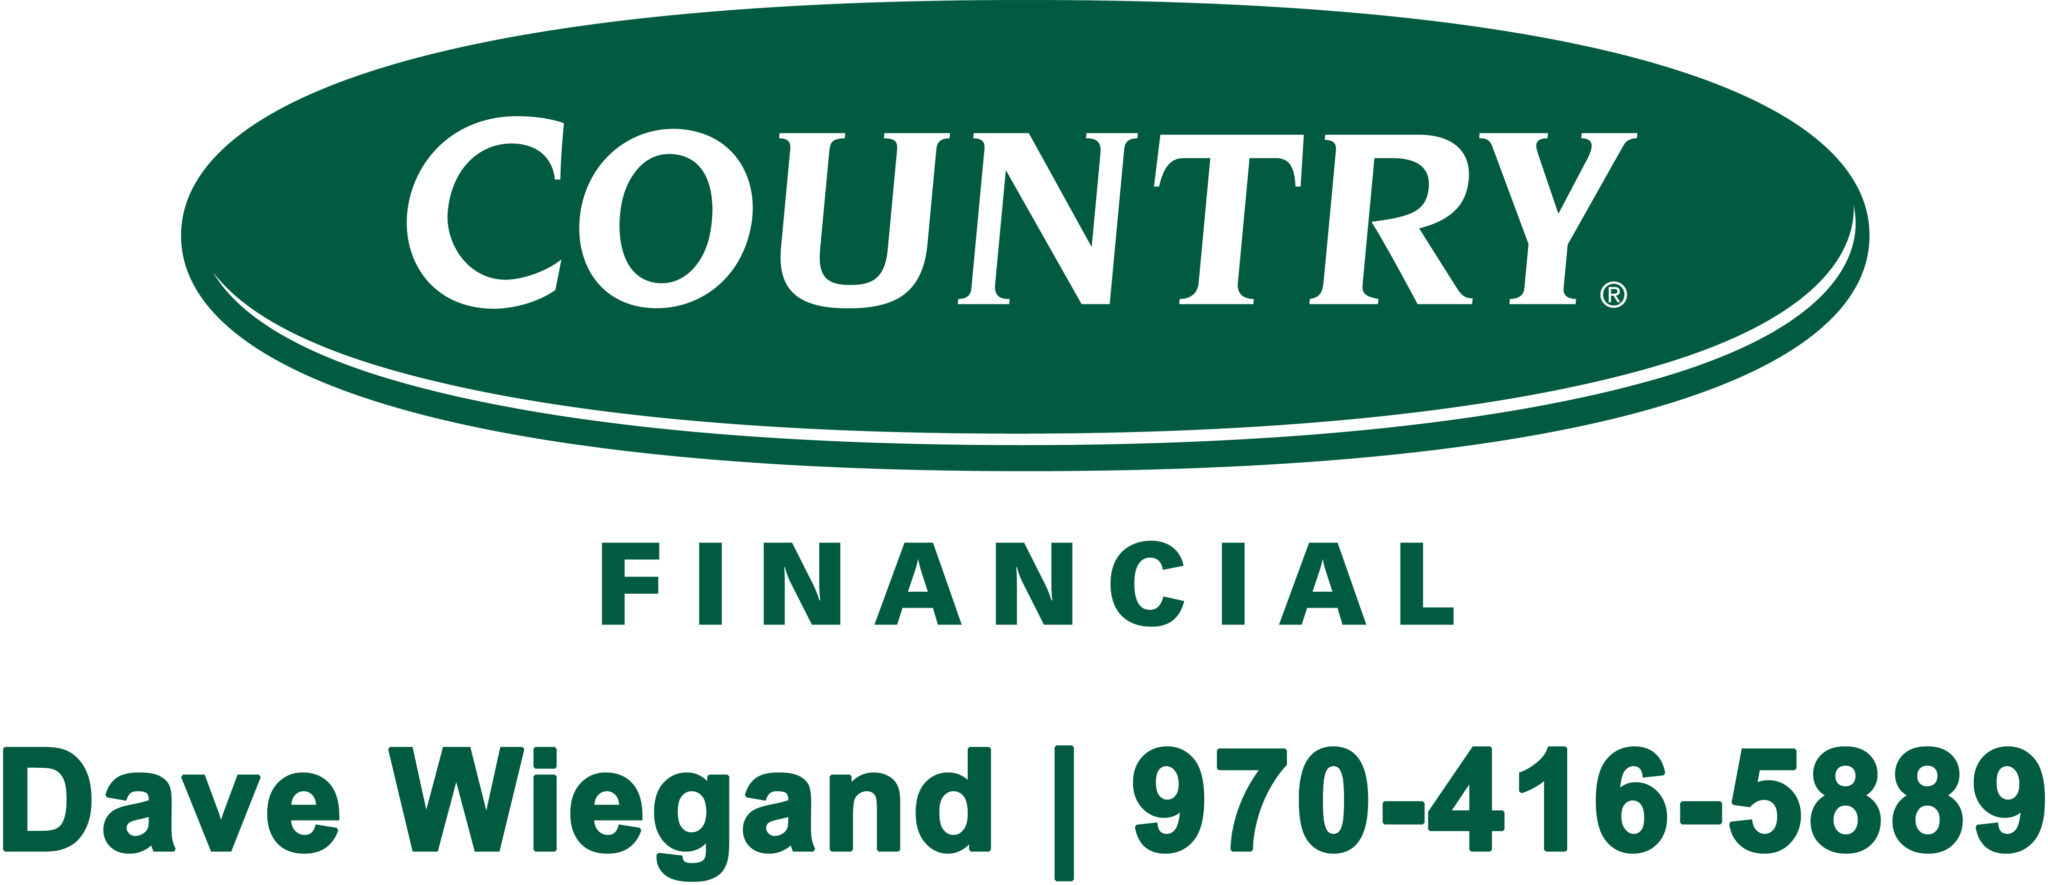 Silver - Country Financial